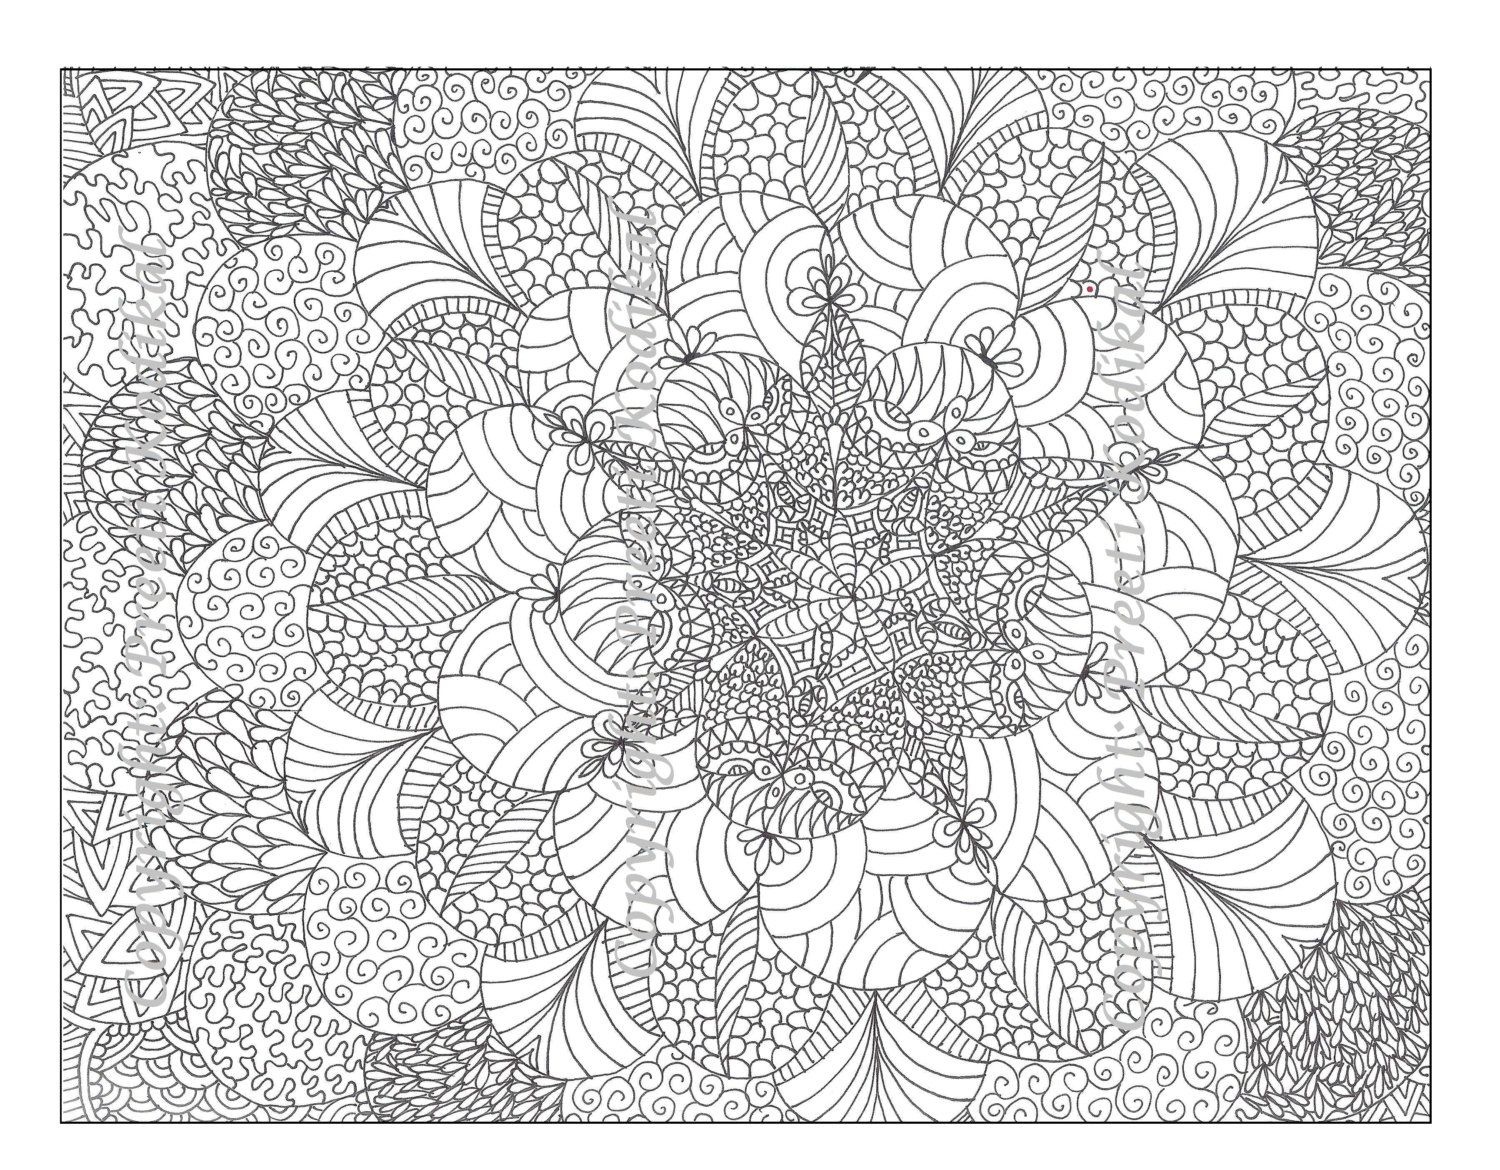 Free Printable Abstract Coloring Pages For Adults - Coloring Home - Free Printable Coloring Designs For Adults